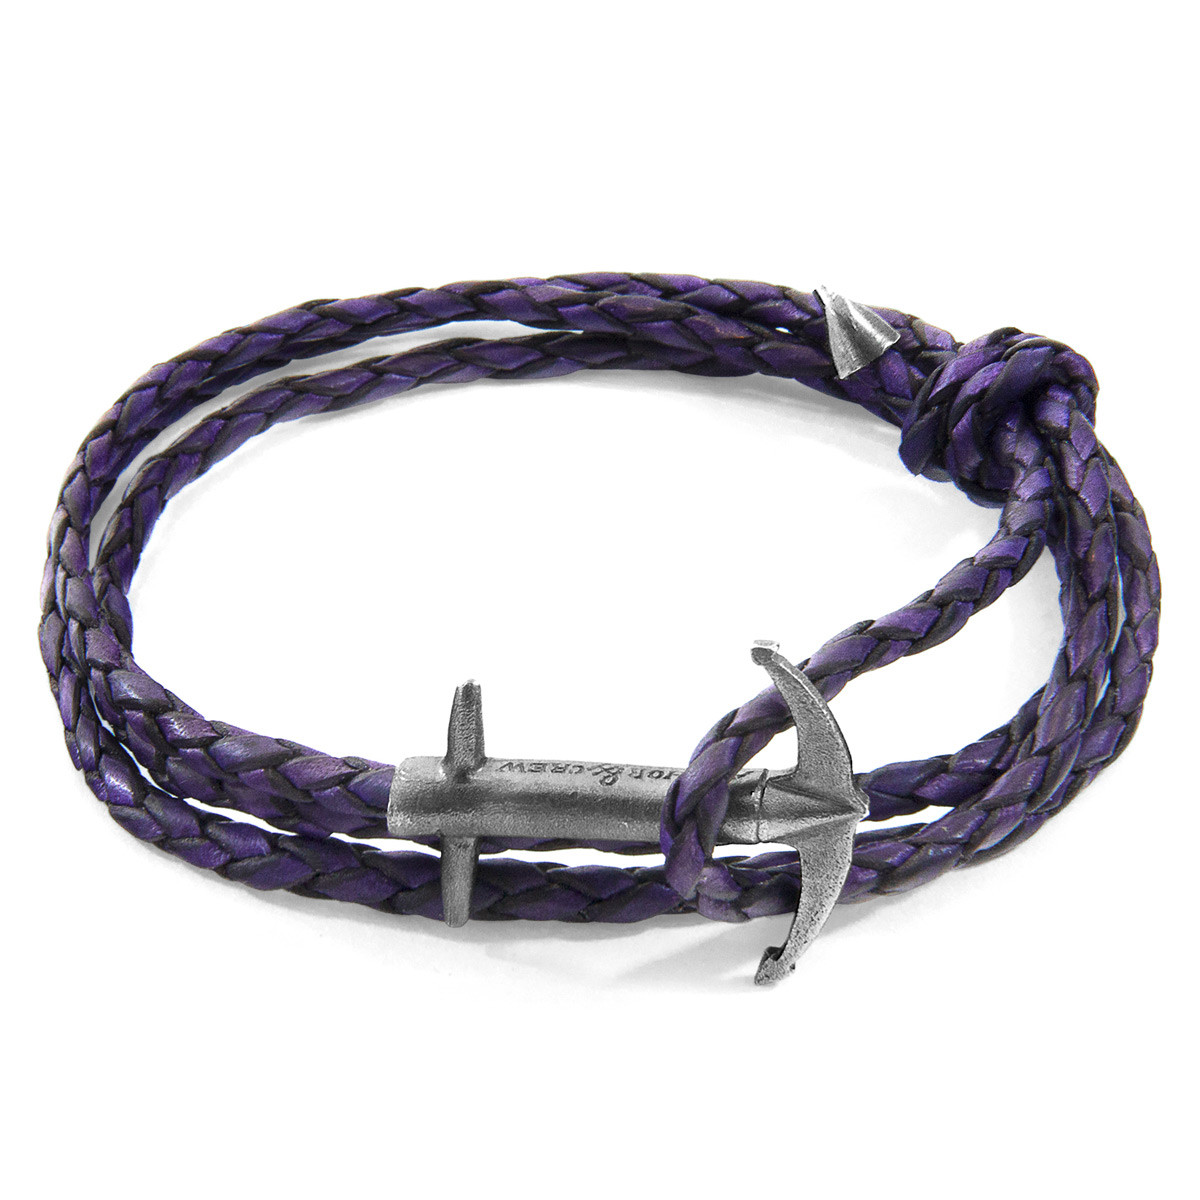 Anchor & Crew Grape Purple Admiral Anchor Silver and Braided Leather Bracelet